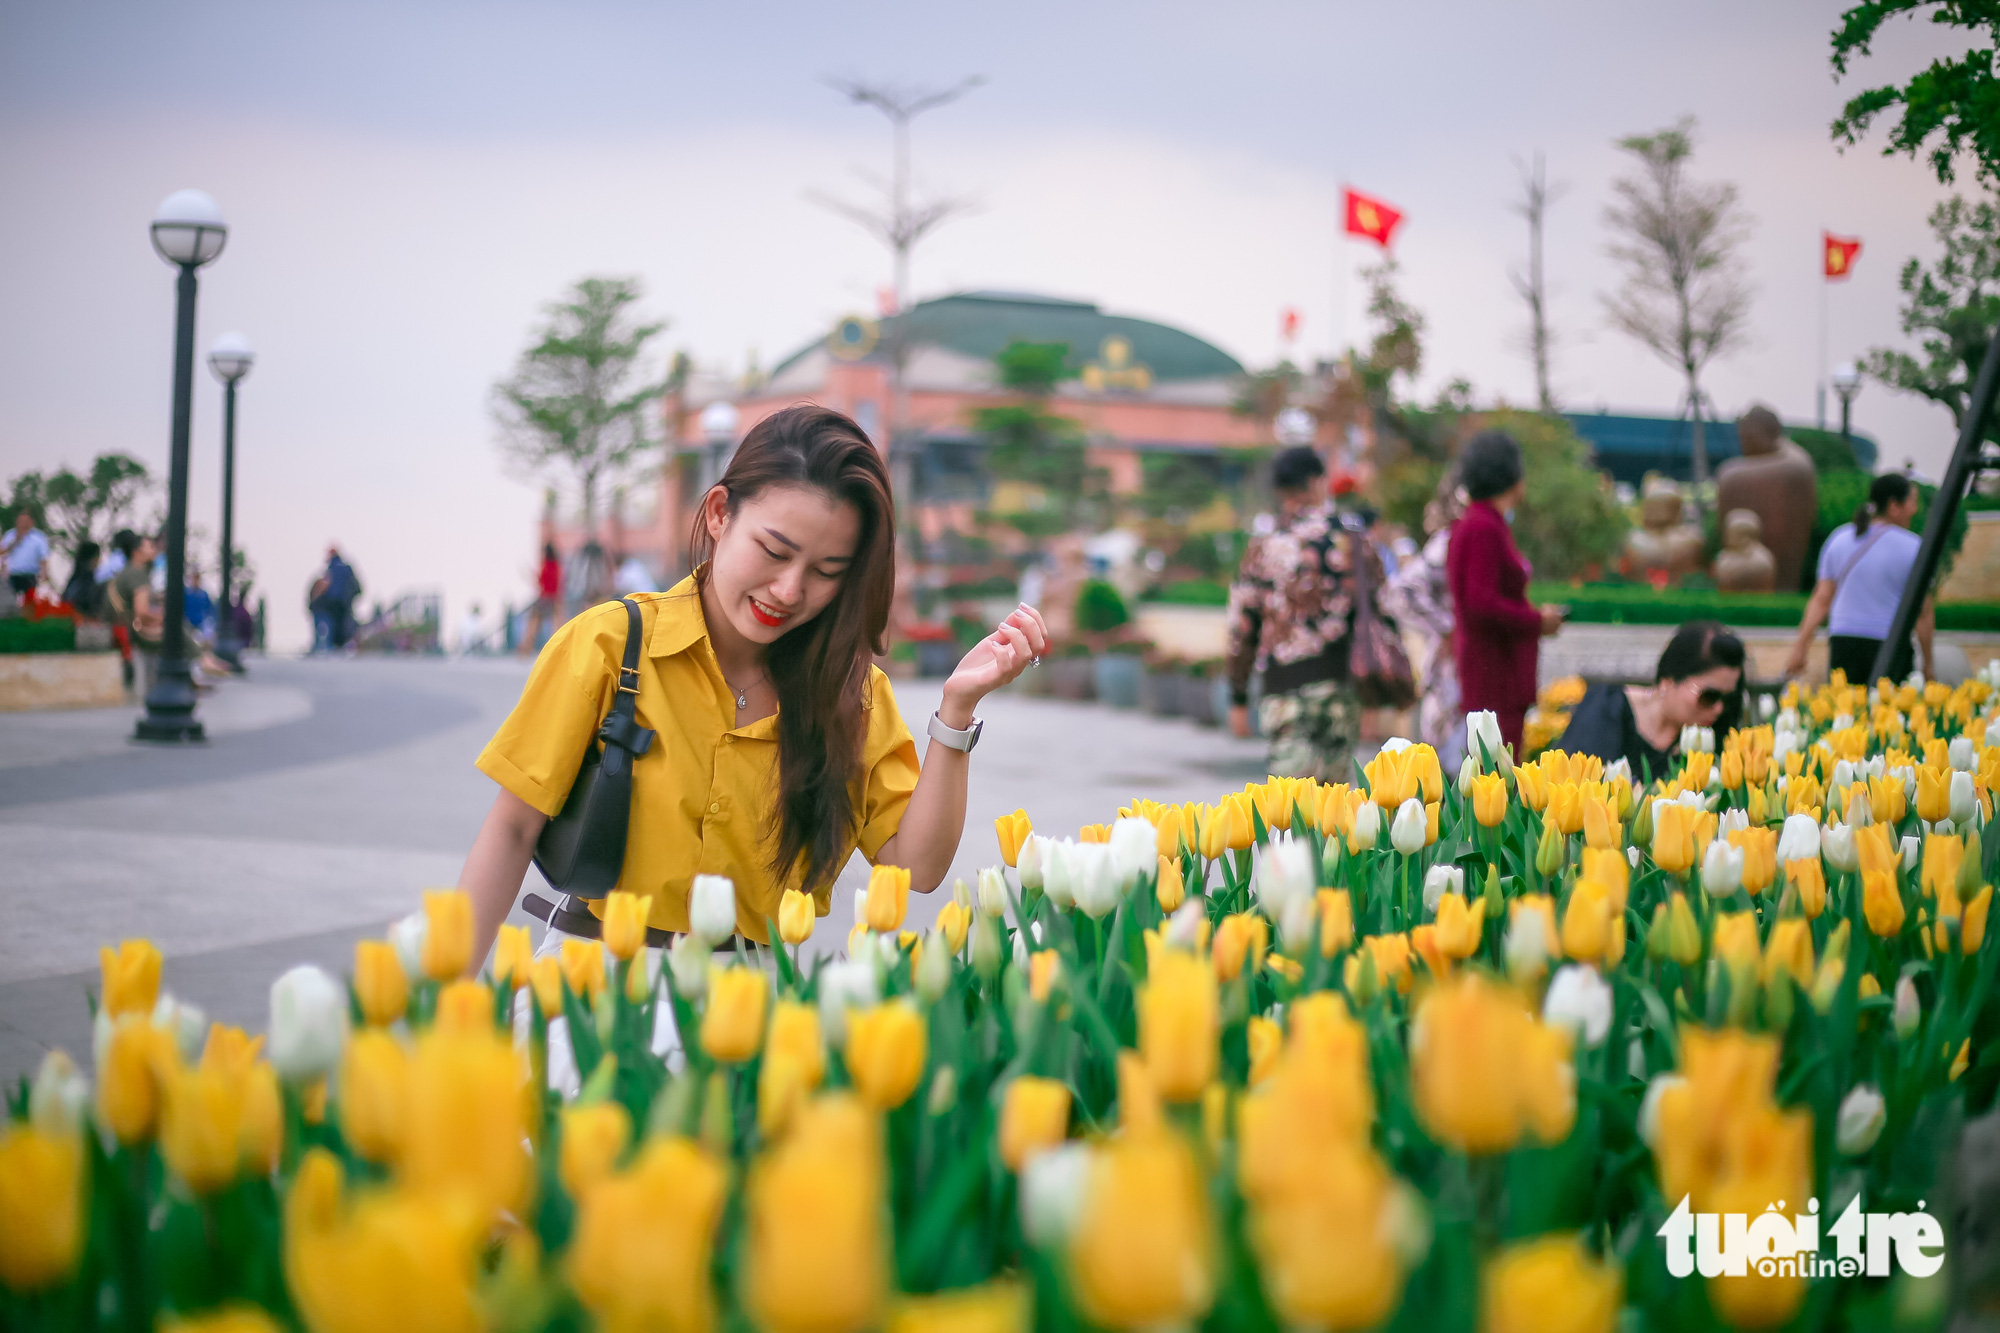 Tulips in full bloom wow visitors to Ba Den Mount in Vietnam's Tay Ninh Province